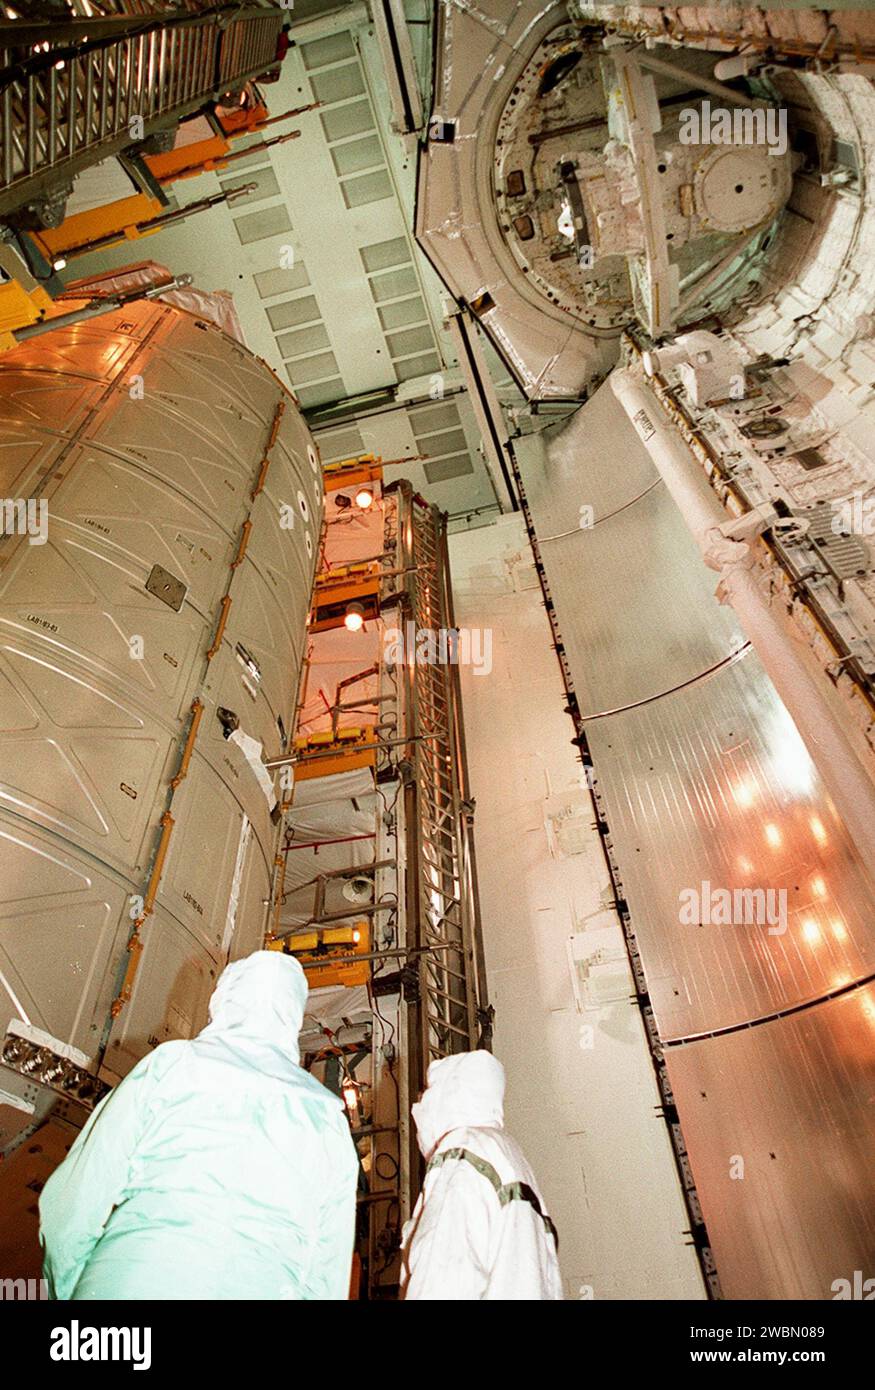 The U.S. Lab Destiny (left) moves away from Atlantis’ payload bay doors (right) into the Payload Changeout Room. Destiny will remain in the PCR while Atlantis rolls back to the Vehicle Assembly Building to allow workers to conduct inspections, continuity checks and X-ray analysis on the 36 solid rocket booster cables located inside each booster’s system tunnel. An extensive evaluation of NASA’s SRB cable inventory revealed conductor damage in four (of about 200) cables on the shelf. Shuttle managers decided to prove the integrity of the system tunnel cables already on Atlantis Stock Photo